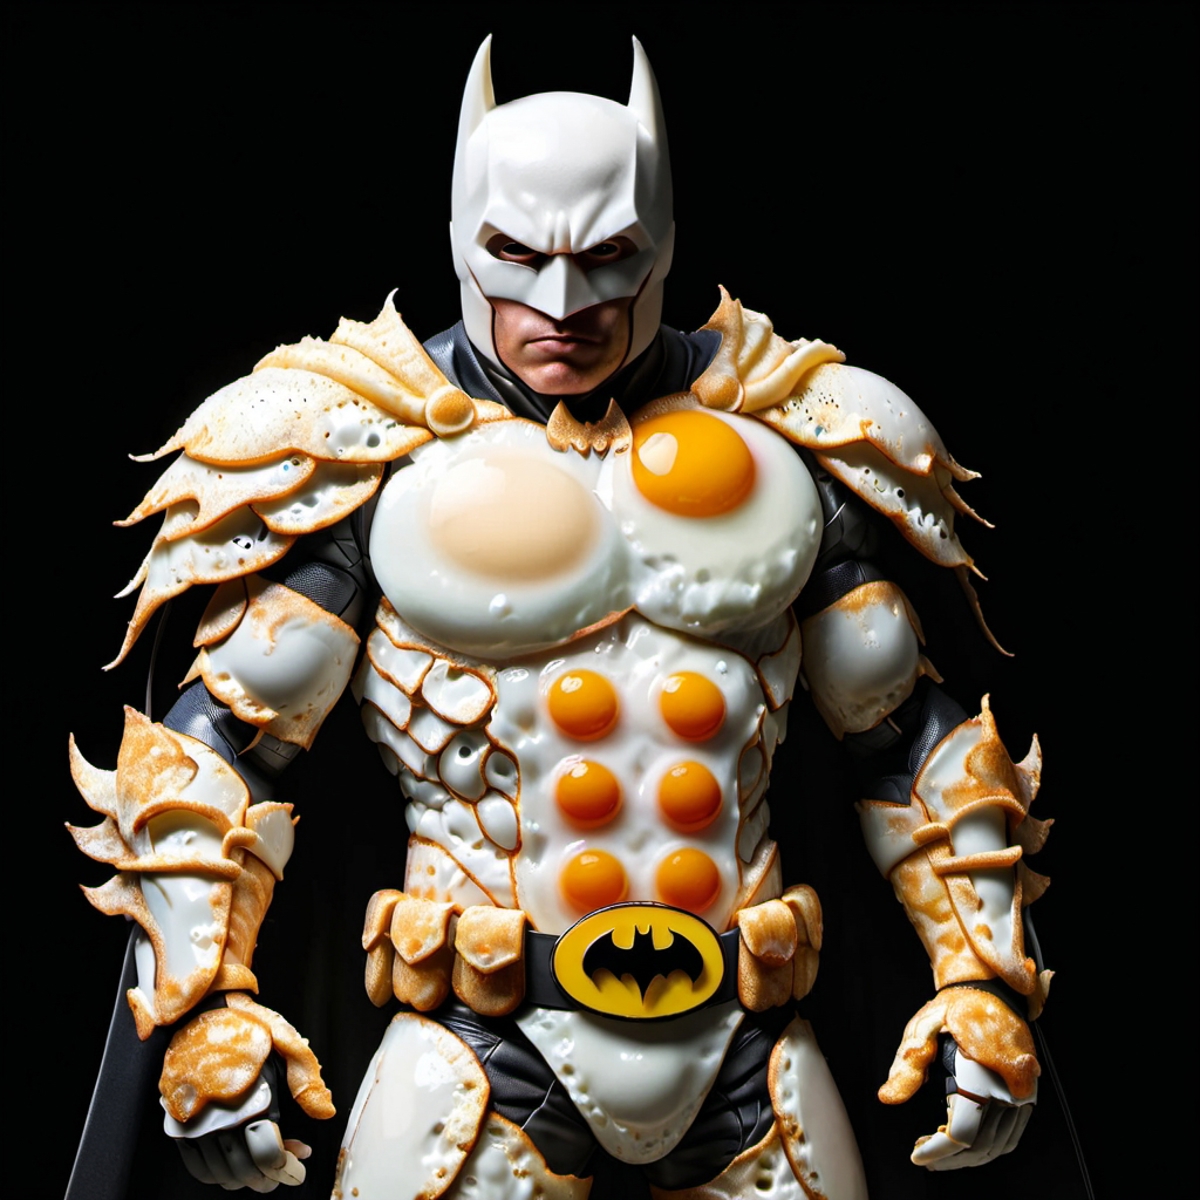 A Batman figure with a unique design featuring eggs on the chest.